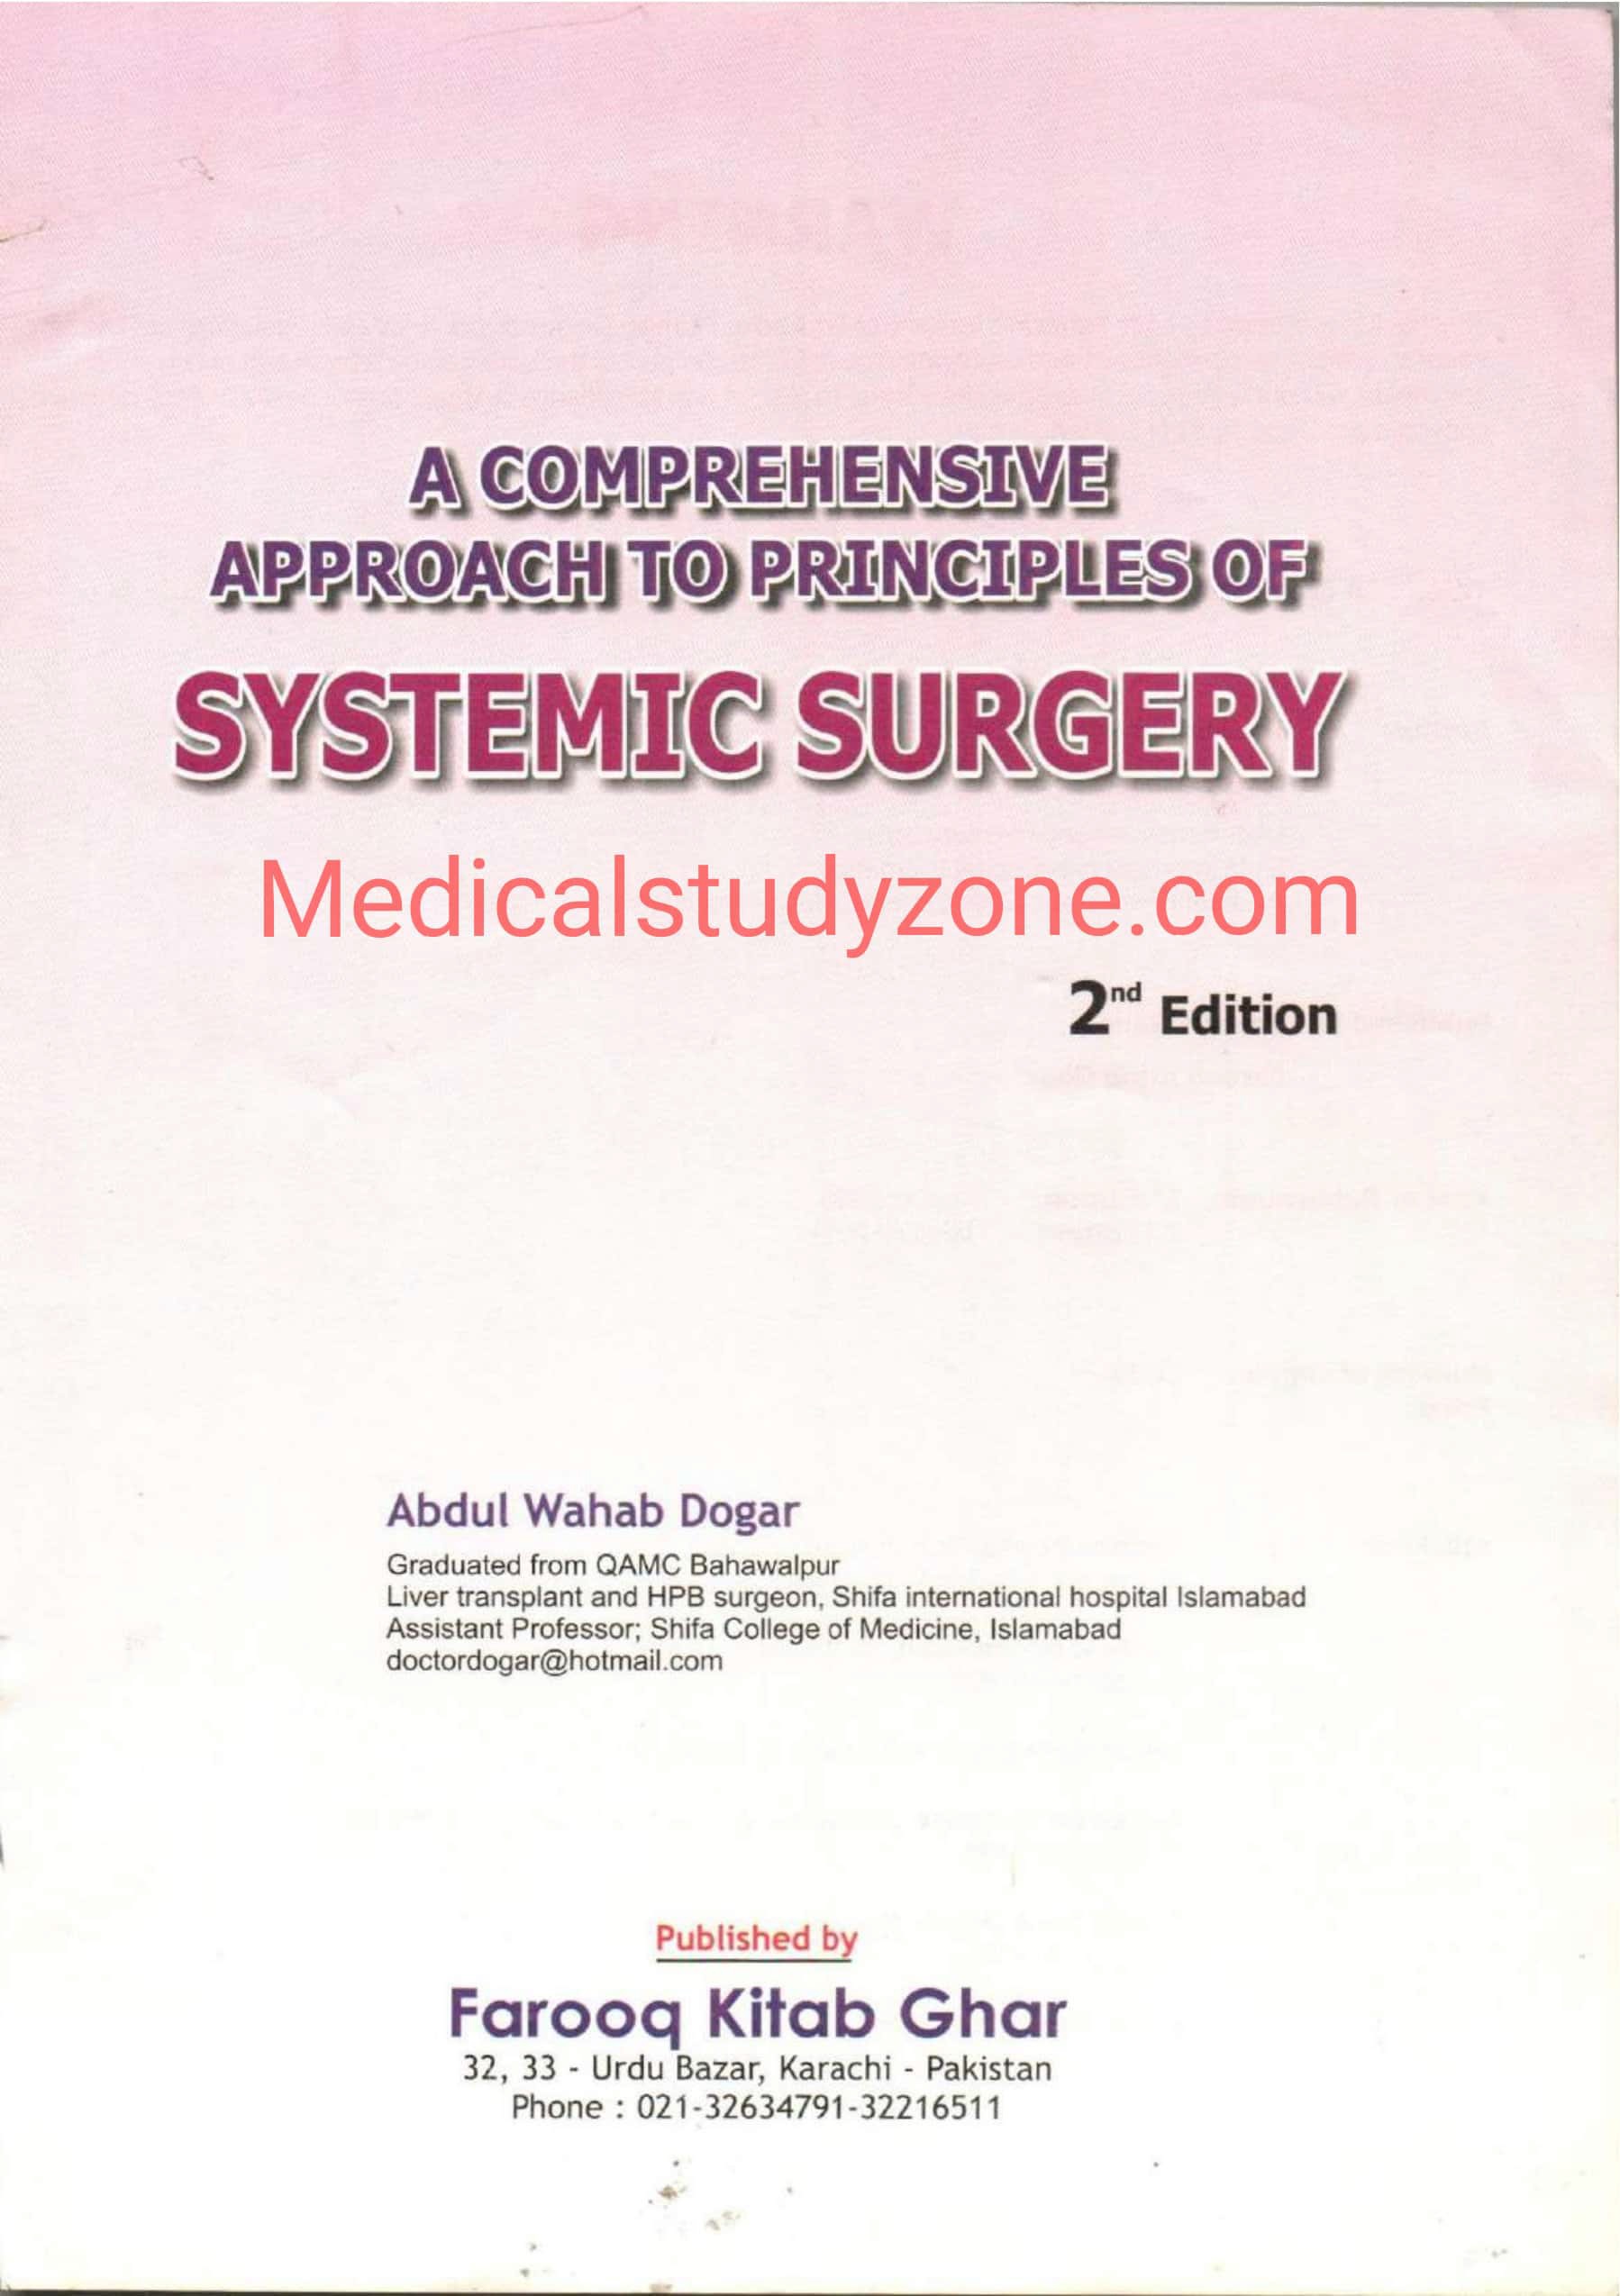 Systemic Surgery by Abdul Wahab Dogar pdf book free download